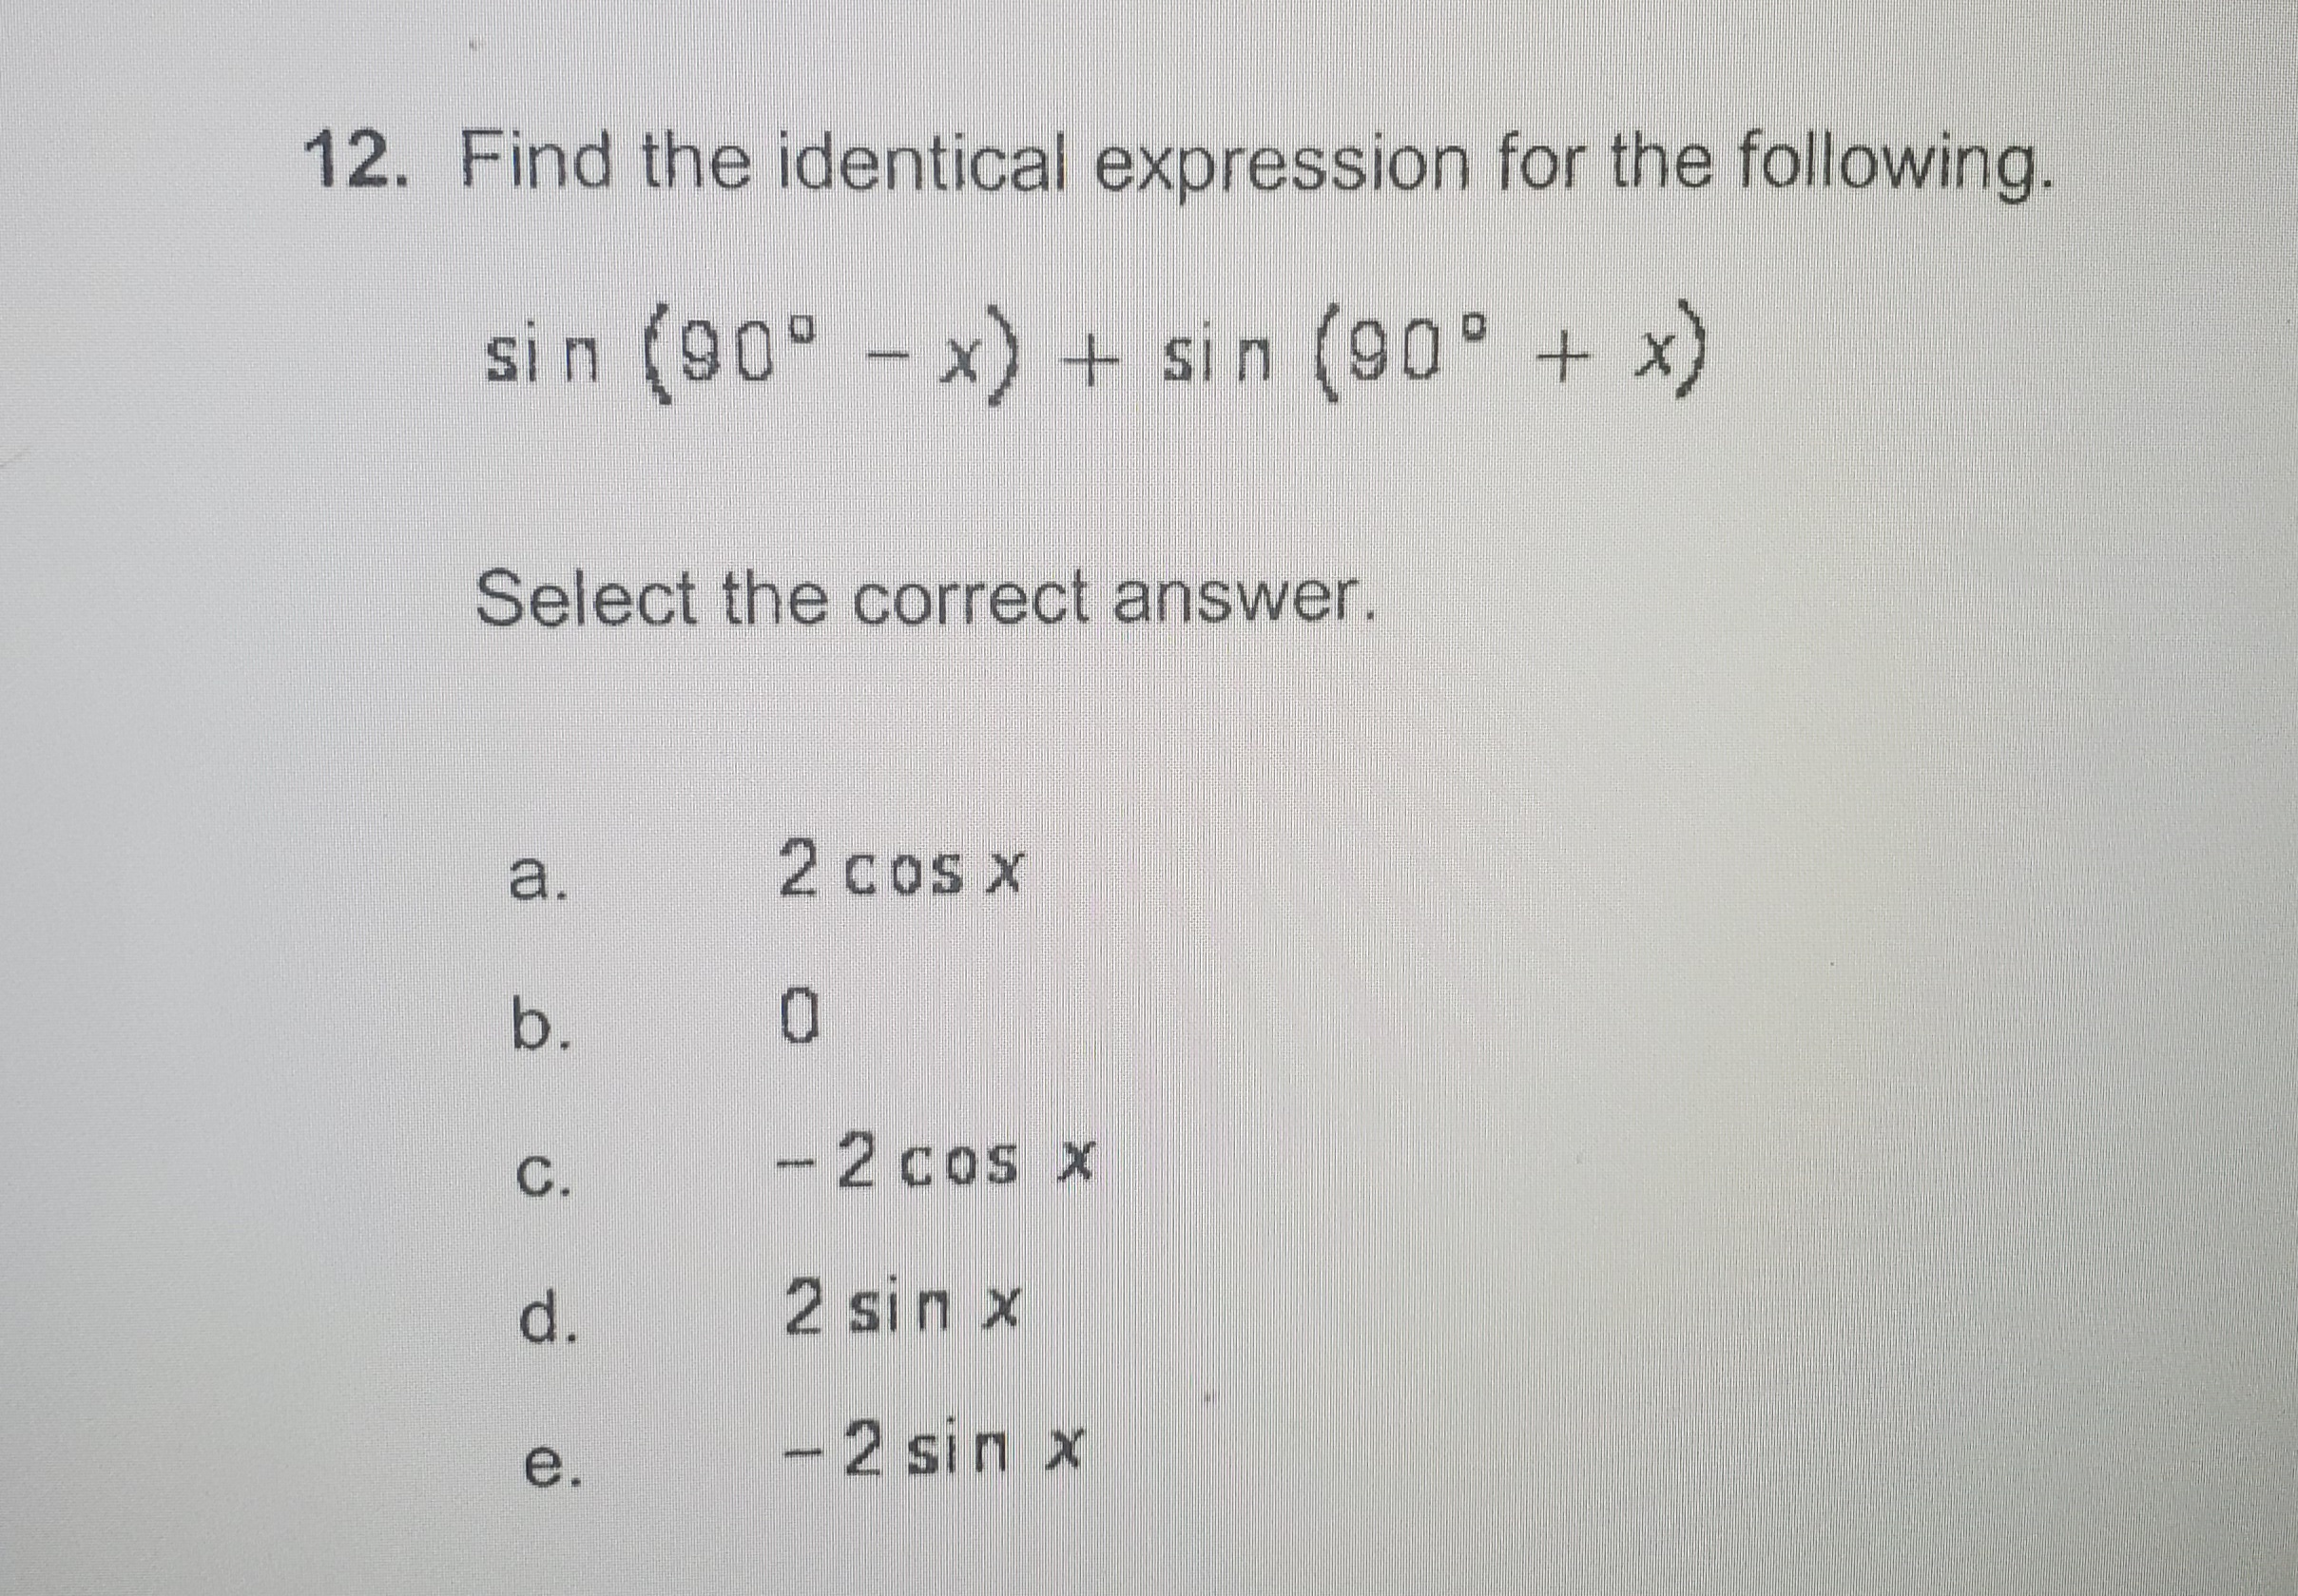 12. Find the identical expression for the following.
sin (90° - x) + sin (90° + x)
Select the correct answer.
2cos x
b.
0.
C.
-2 cos x
d.
2 sin x
e.
-2 sin x
a.
